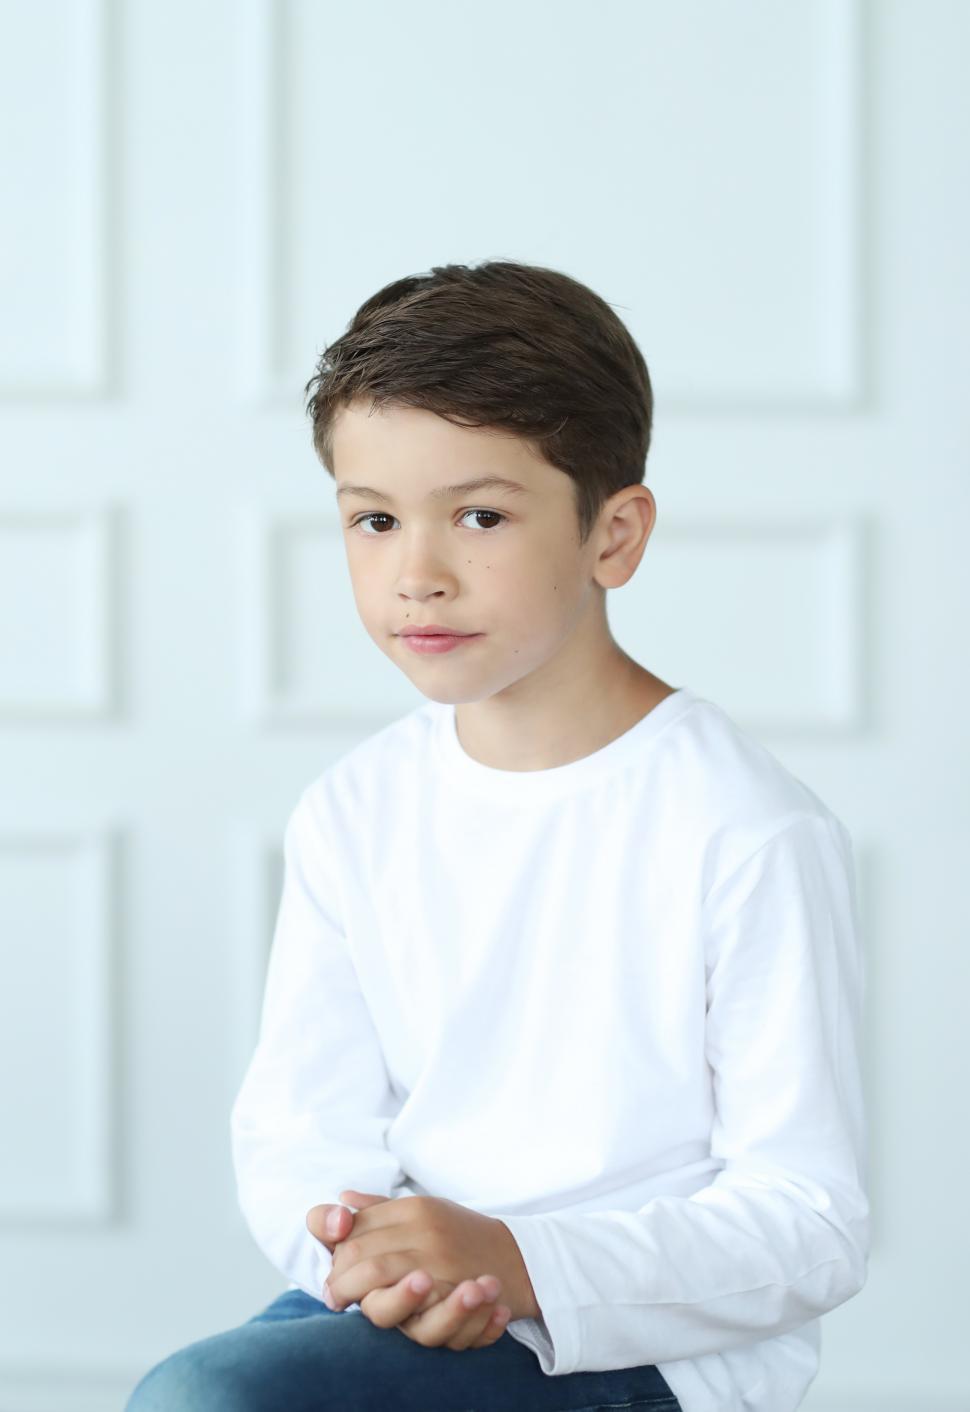 Free Image of Portrait of a Young Boy 